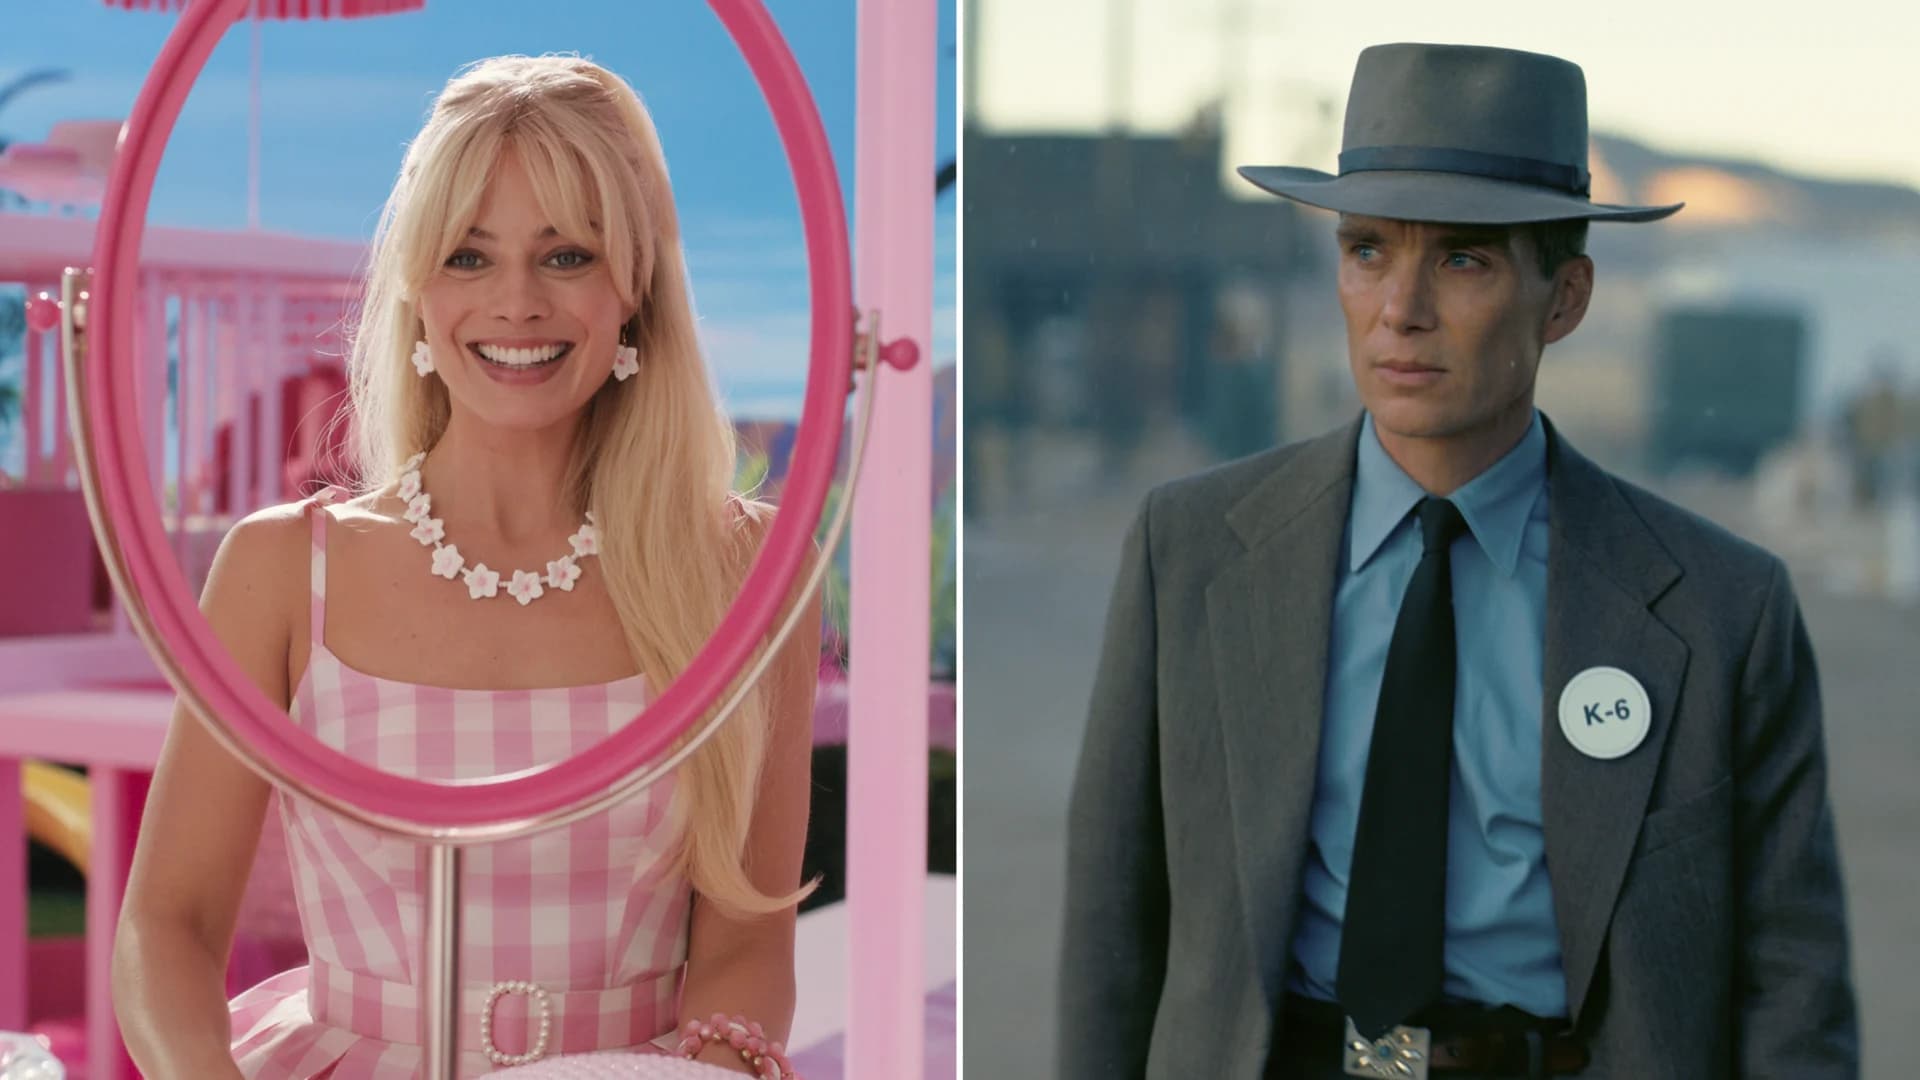 Should you watch ‘Barbie,’ ‘Oppenheimer’ or both? 2 highly anticipated movies released this weekend creates Barbenheimer fever